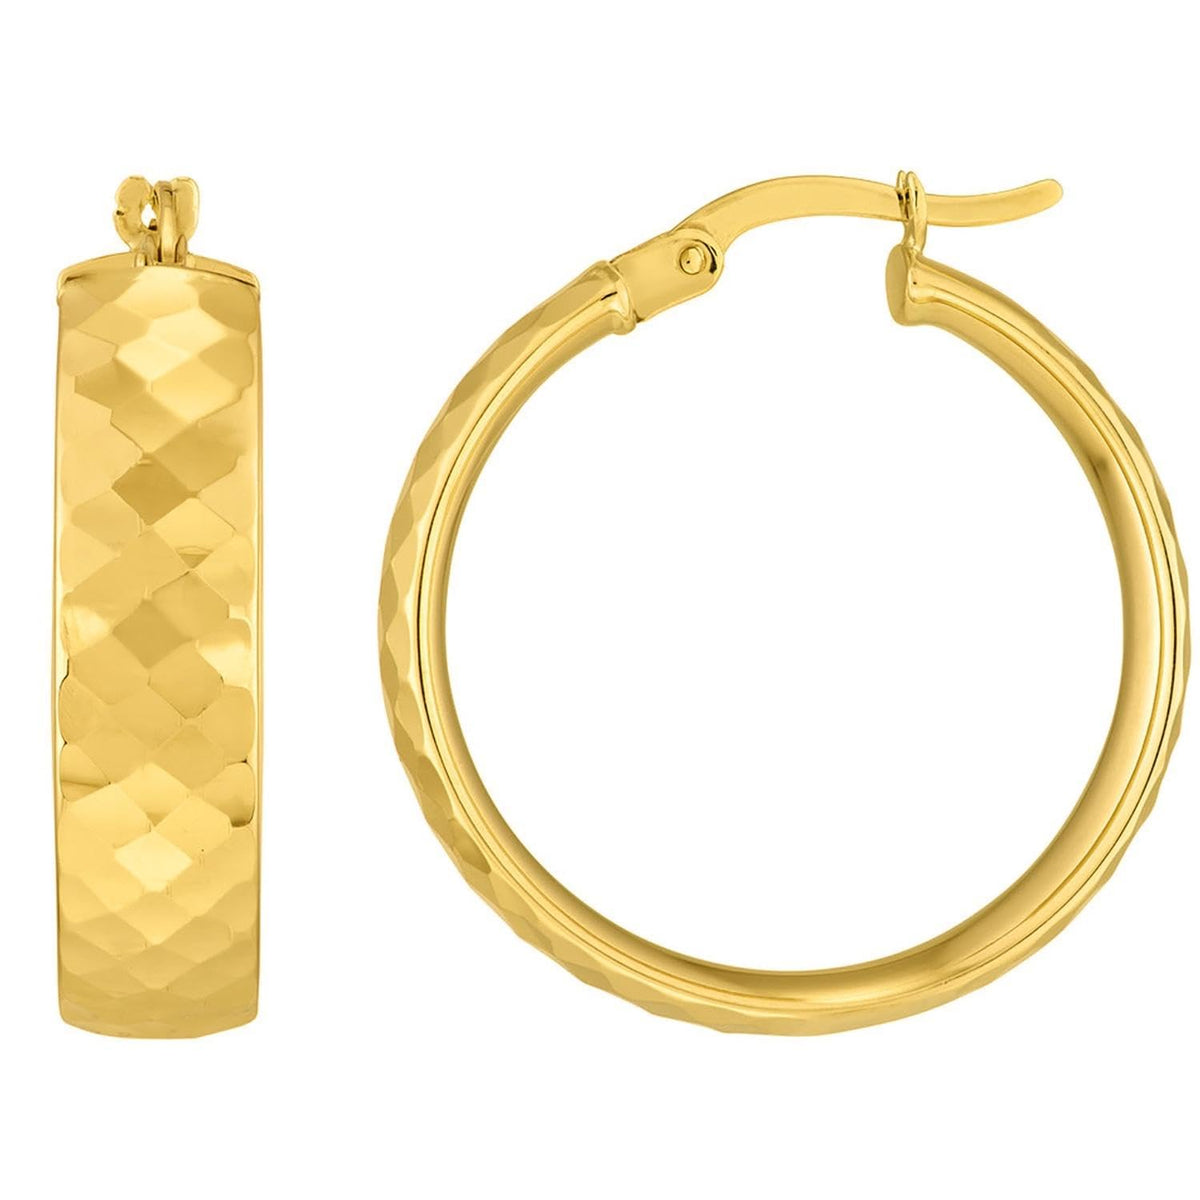 14k Yellow Gold Flat Hammerred Hoop Earrings with Latch Back, 6mm Wide